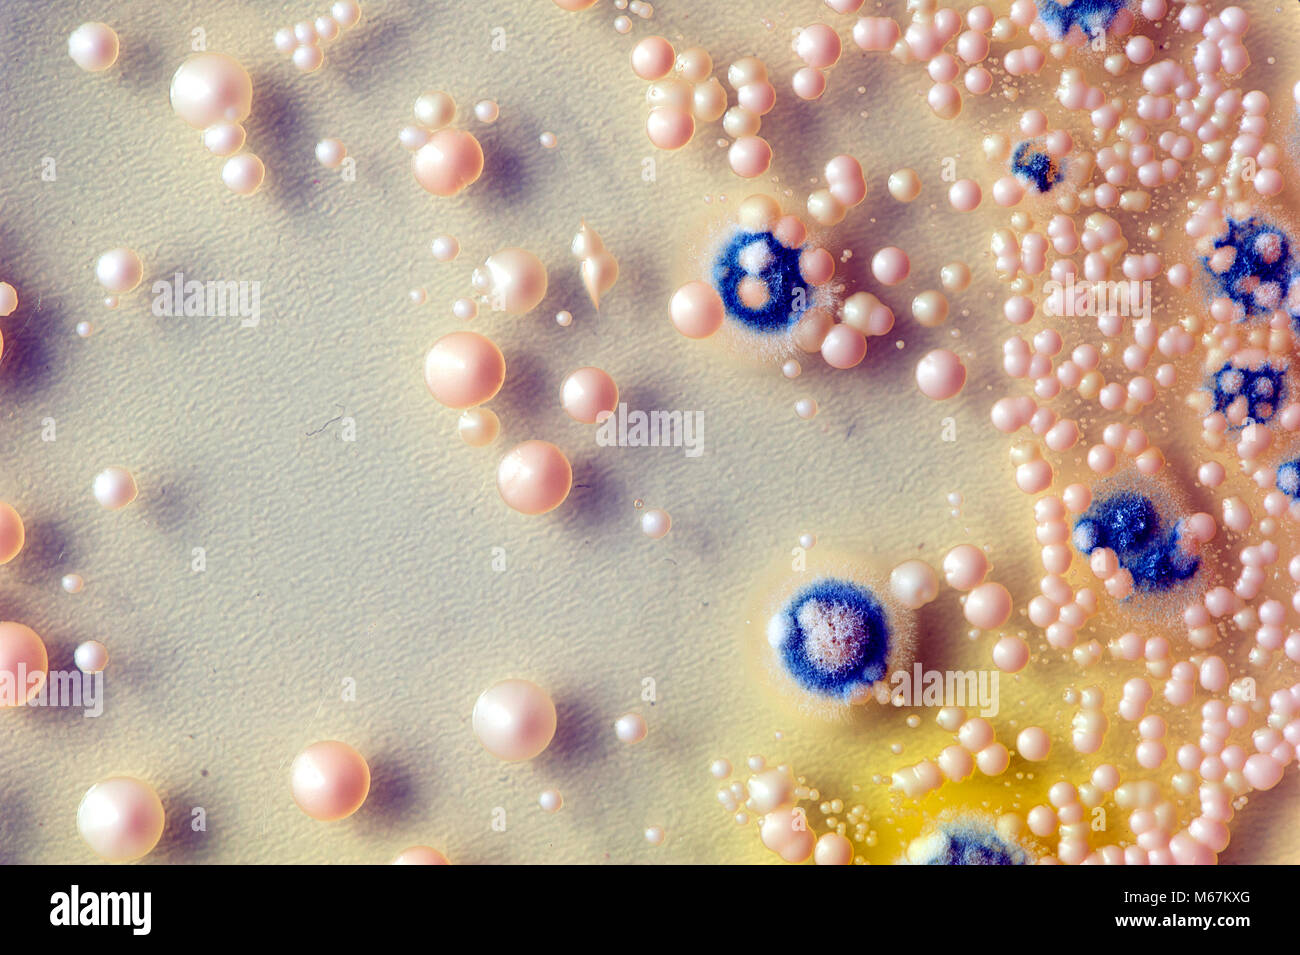 microbiology background made of yeast and mold colonies. Surface of agar petri dish. Stock Photo